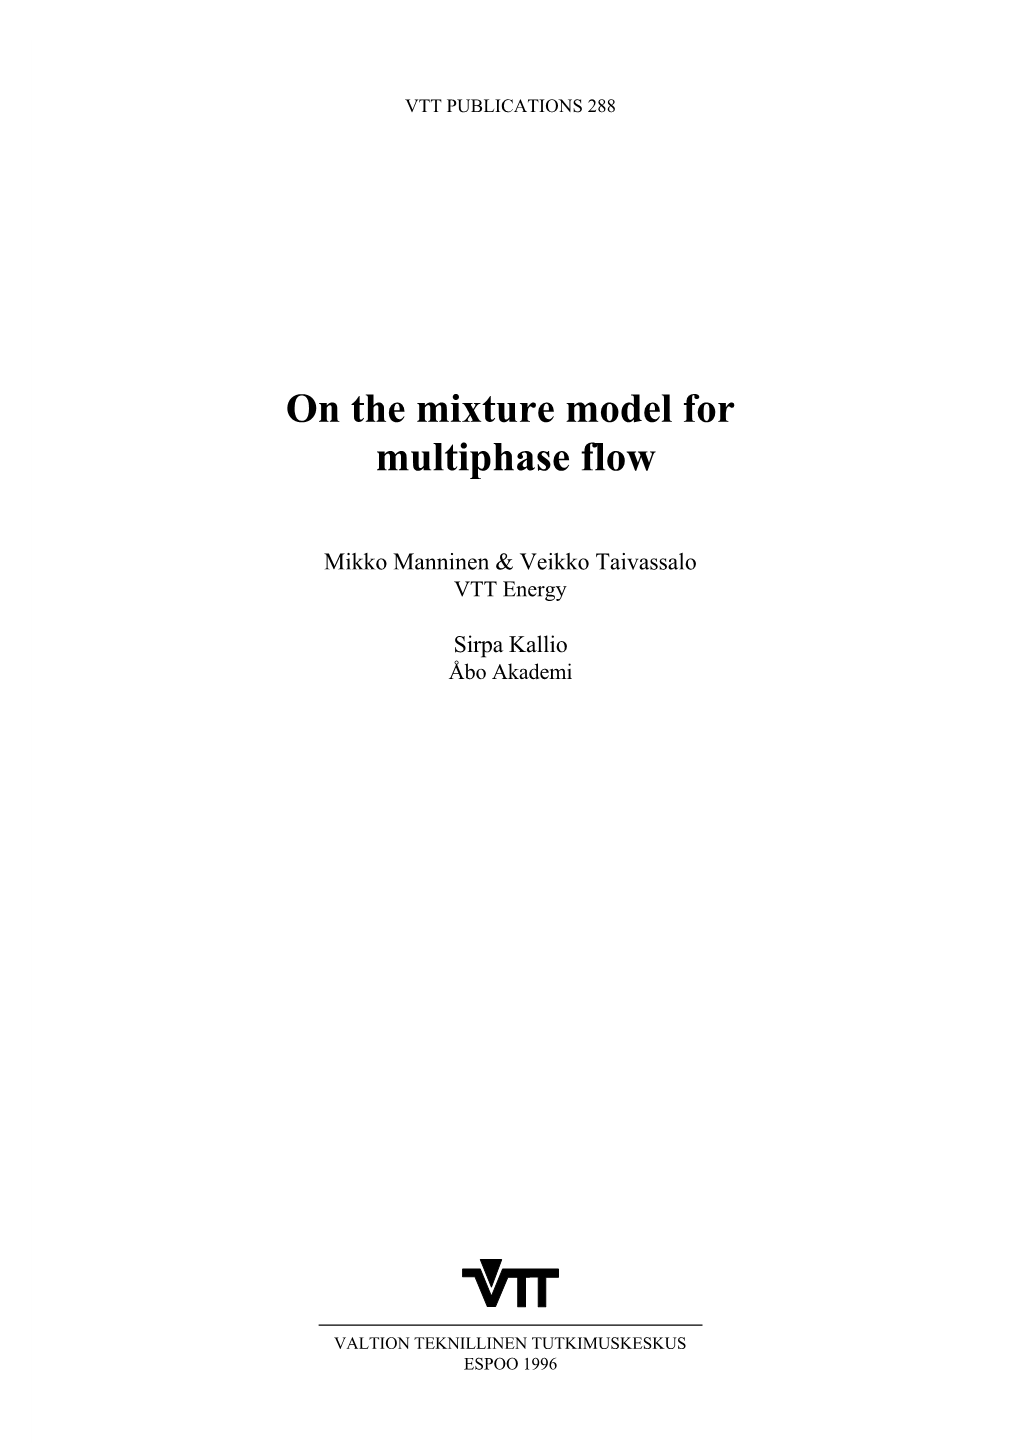 On the Mixture Model for Multiphase Flow